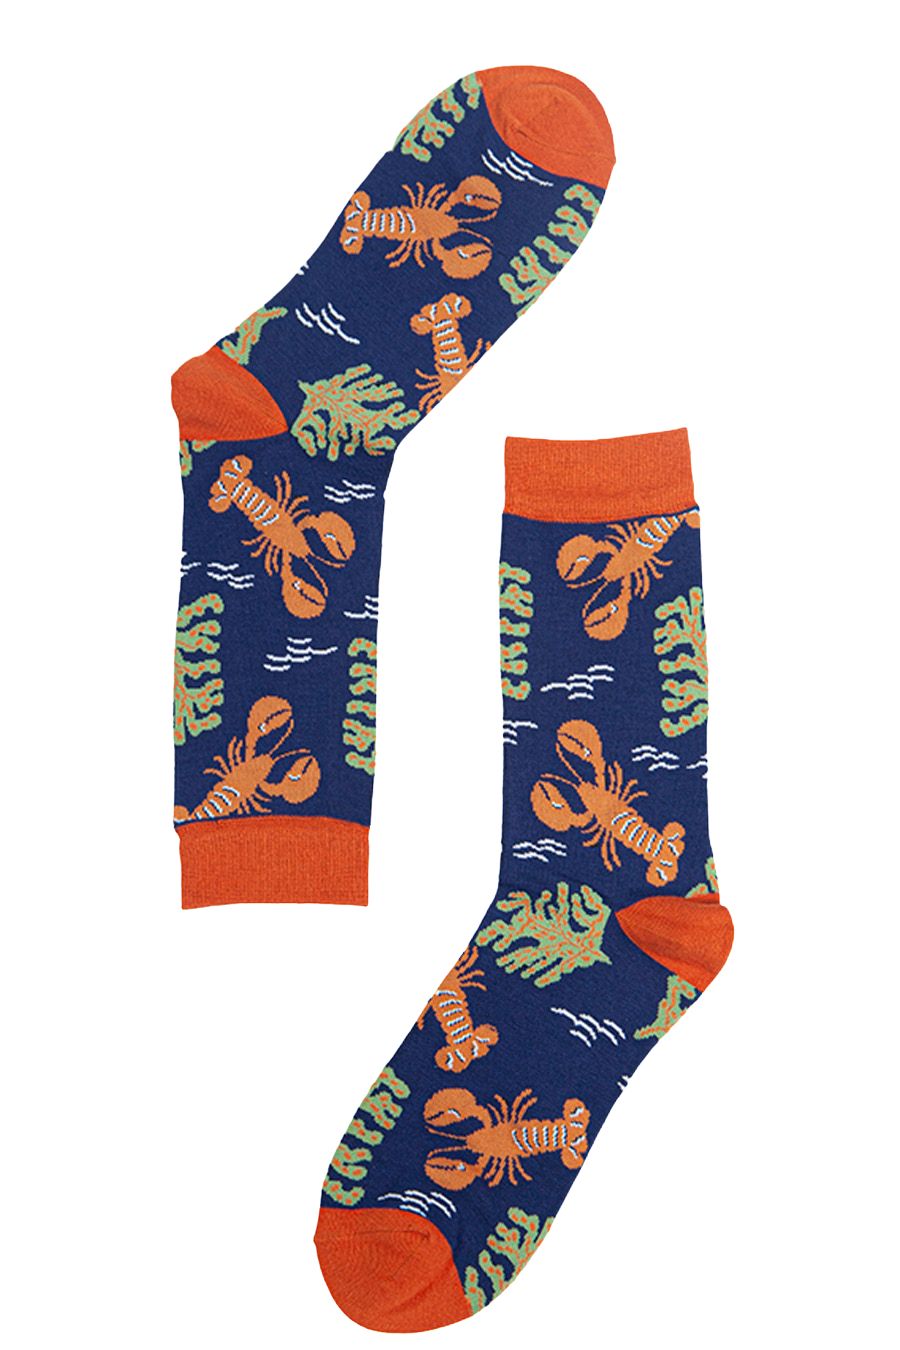 blue bamboo socks featuring lobsters and marine plants